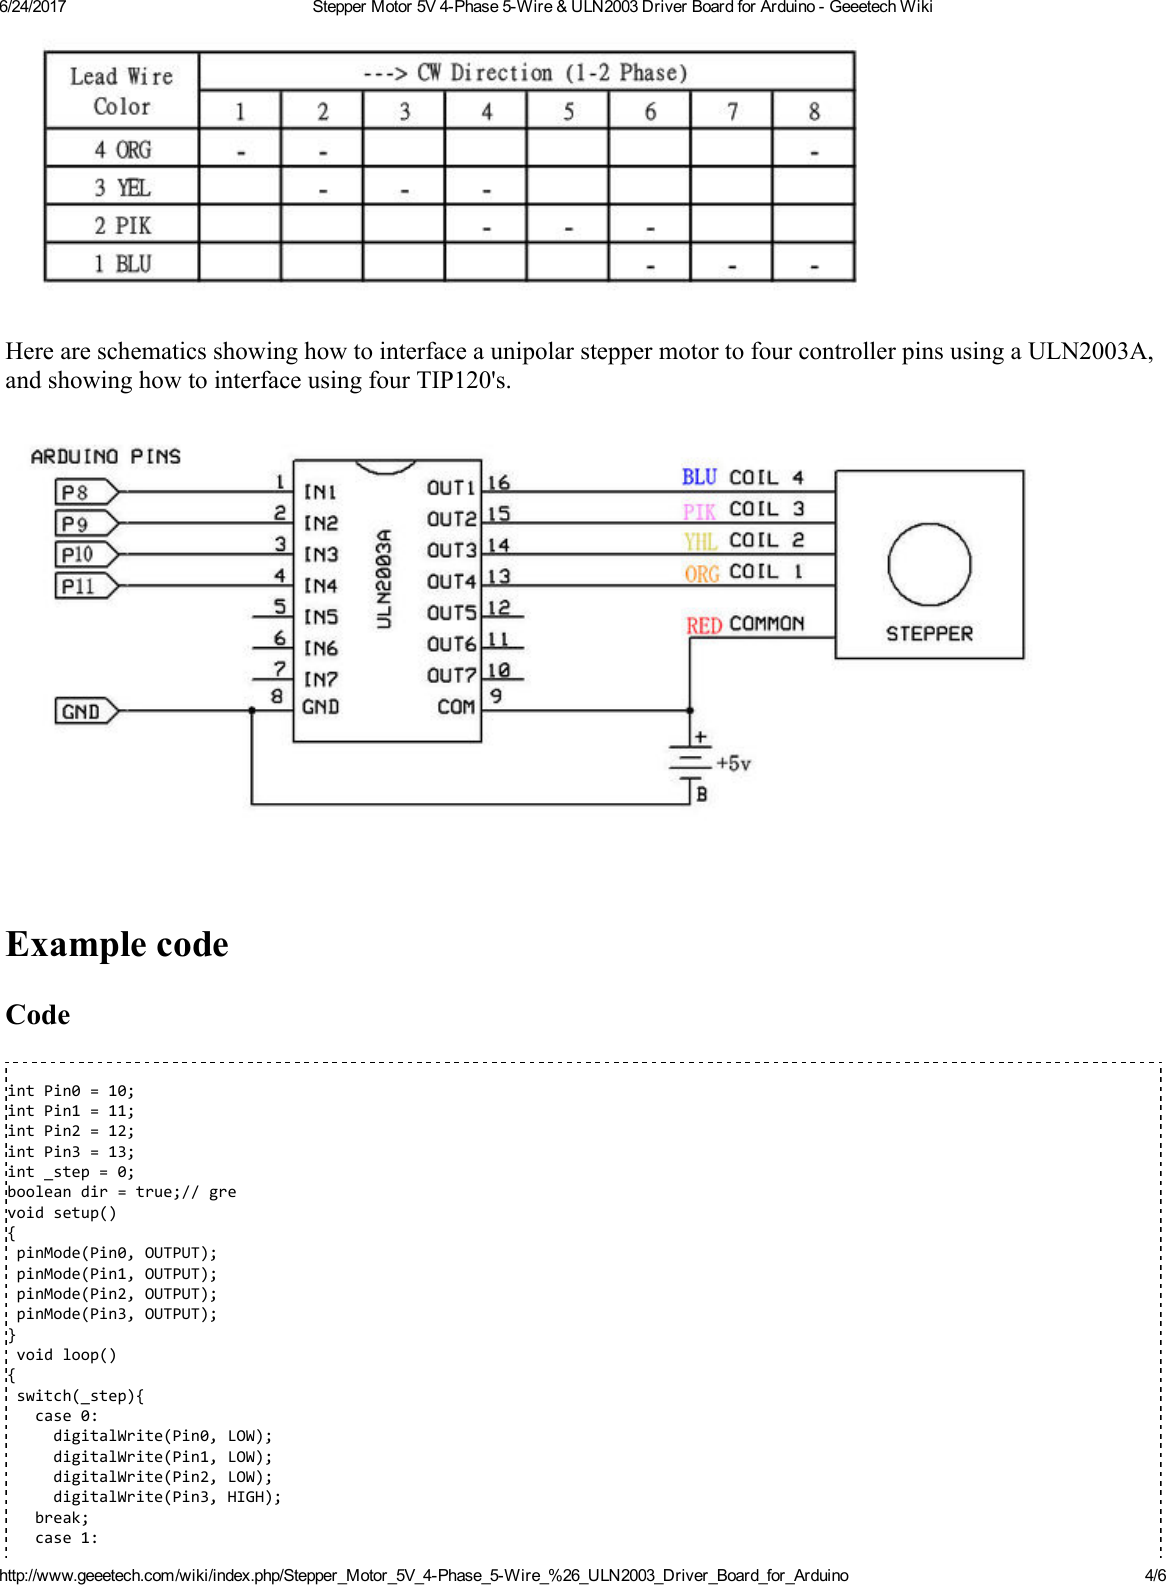 Page 4 of 6 - Stepper Motor 5V 4-Phase 5-Wire & ULN2003 Driver Board For Arduino - Geeetech Wiki